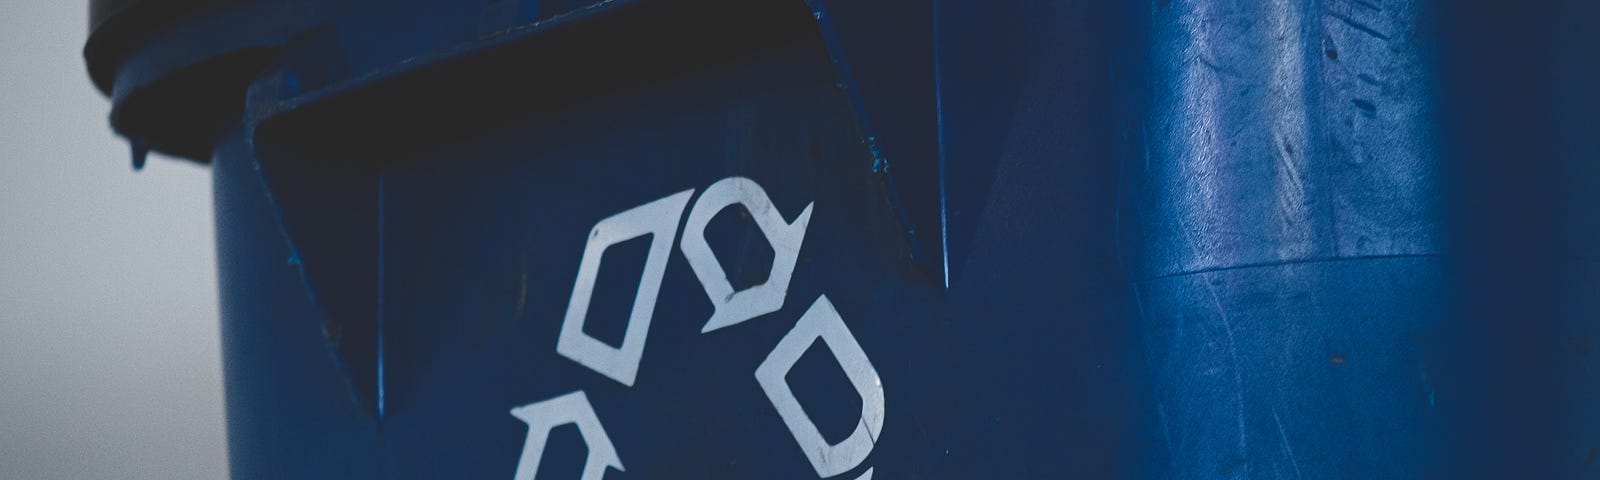 The recycling symbol